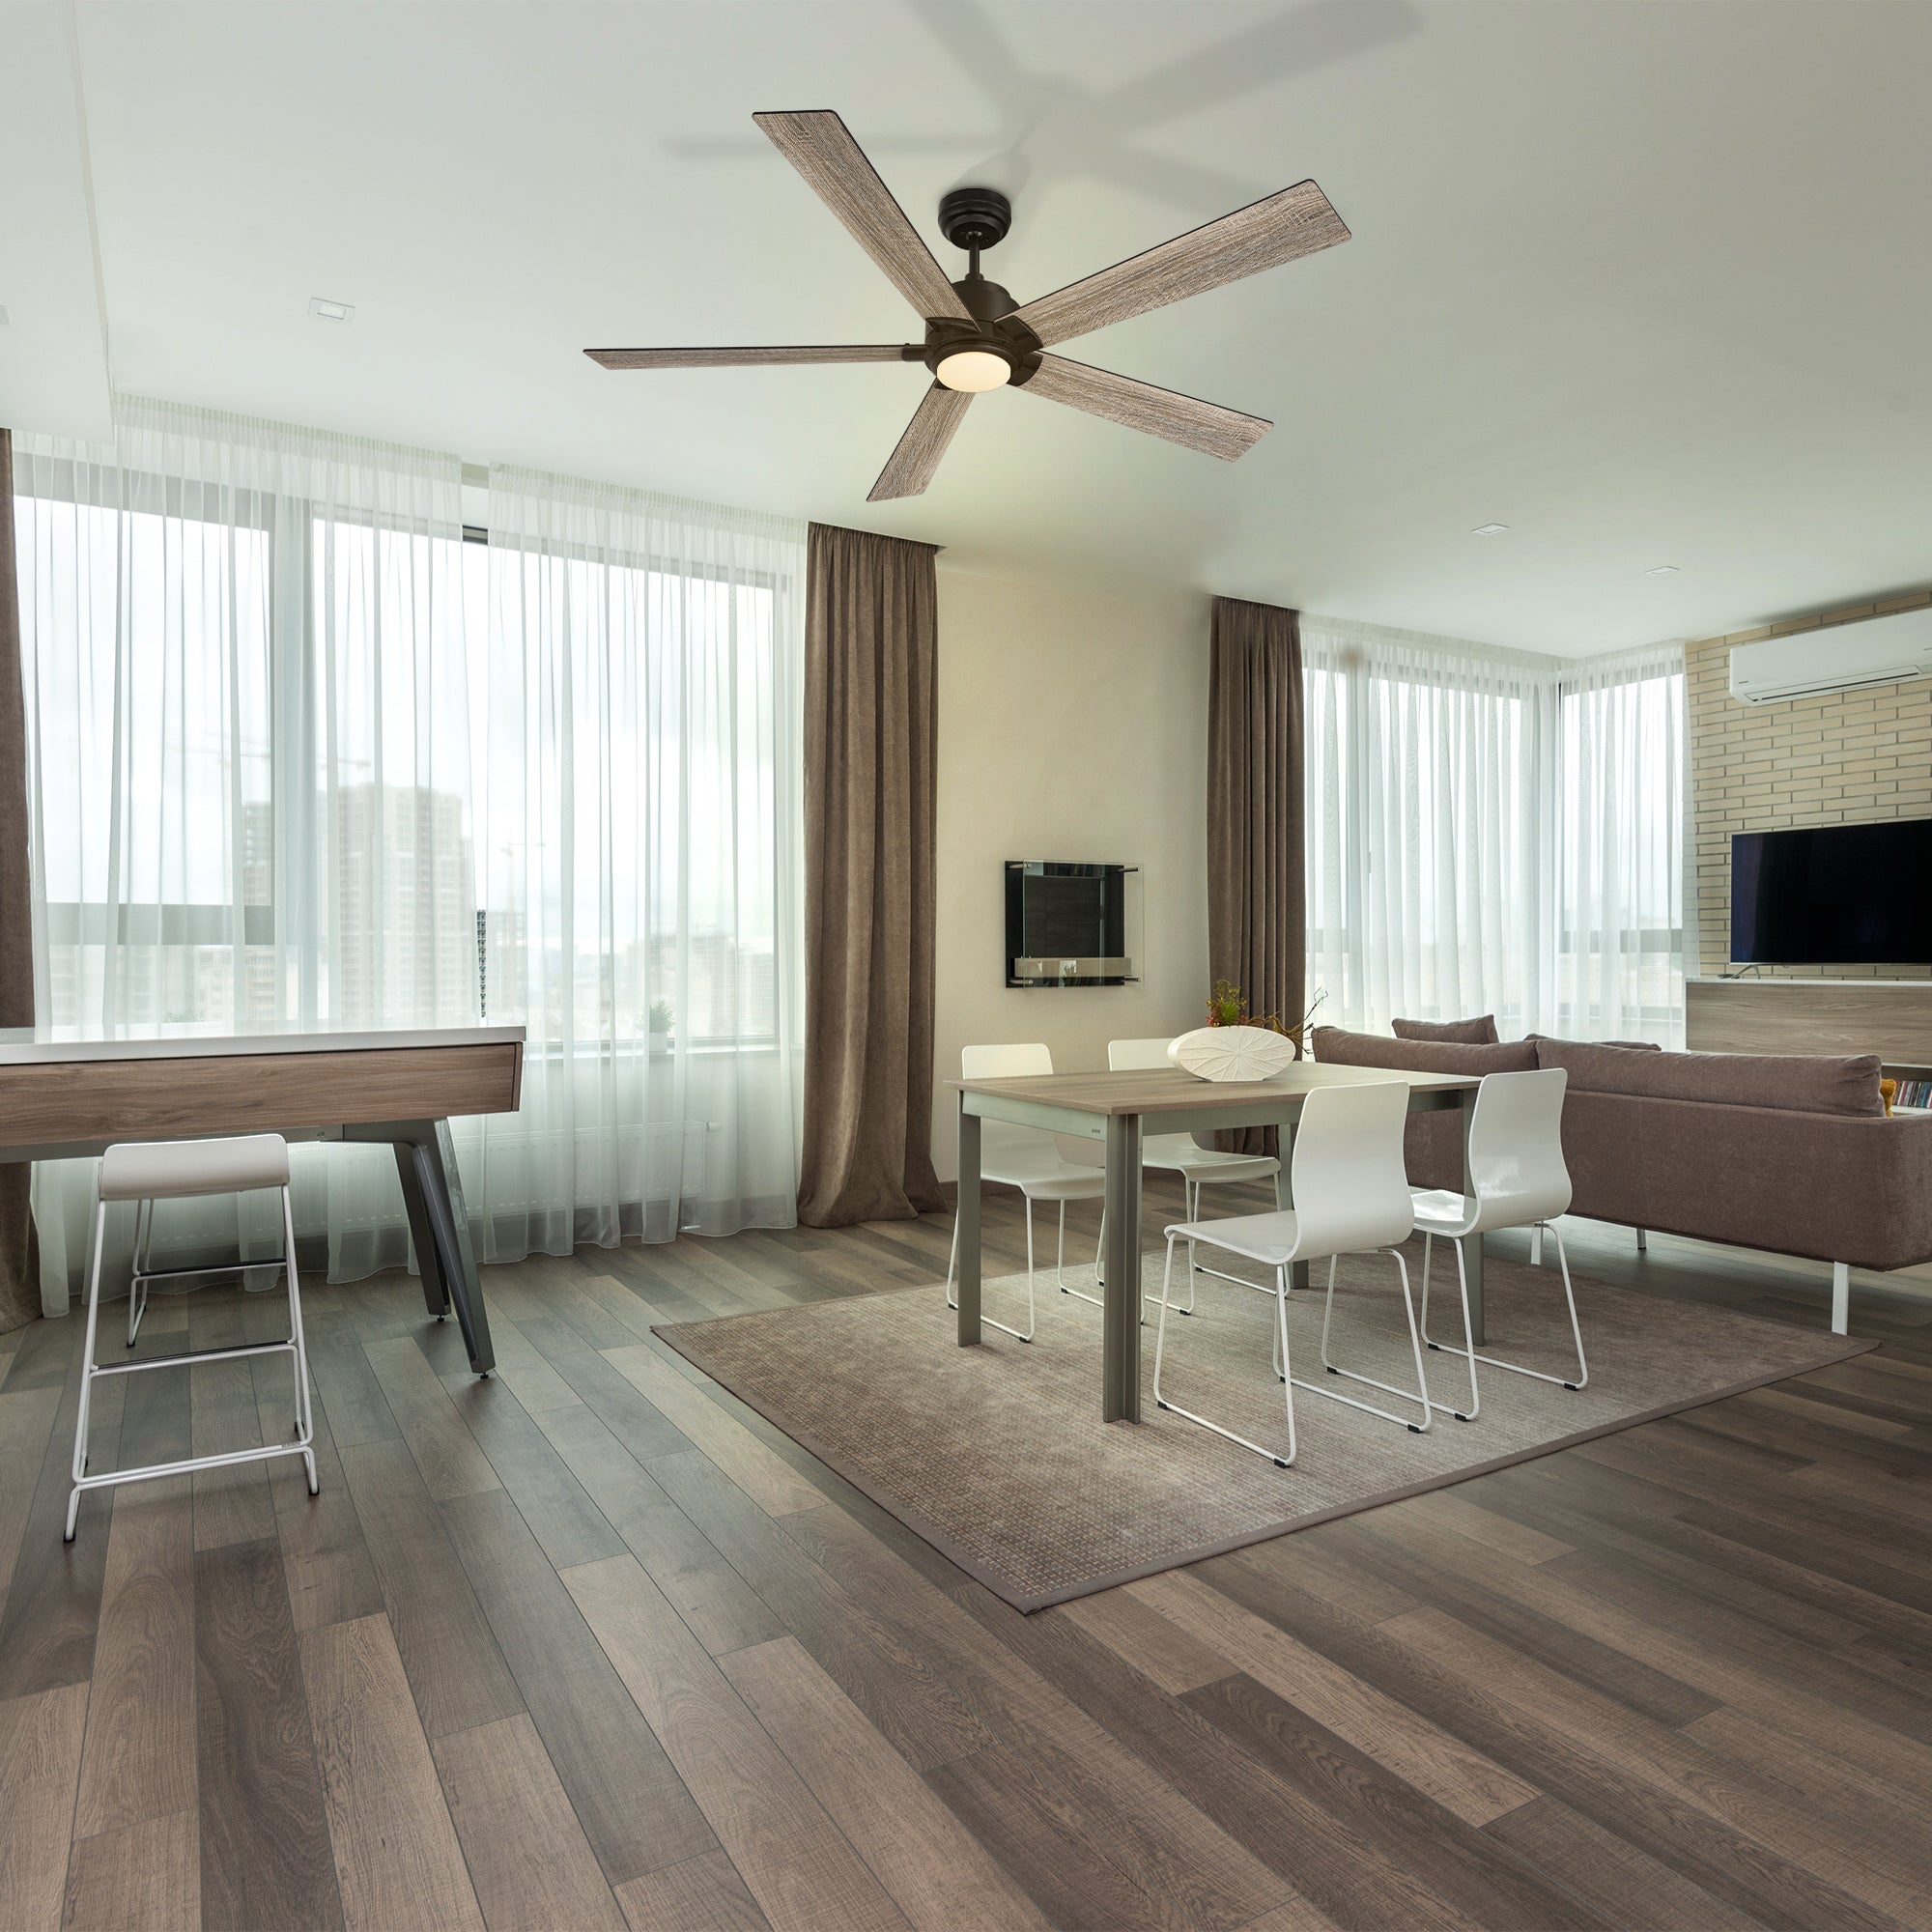 Remote control ceiling fan adds a stylish touch to living room decor, providing comfort and convenience at your fingertips. #color_Wood